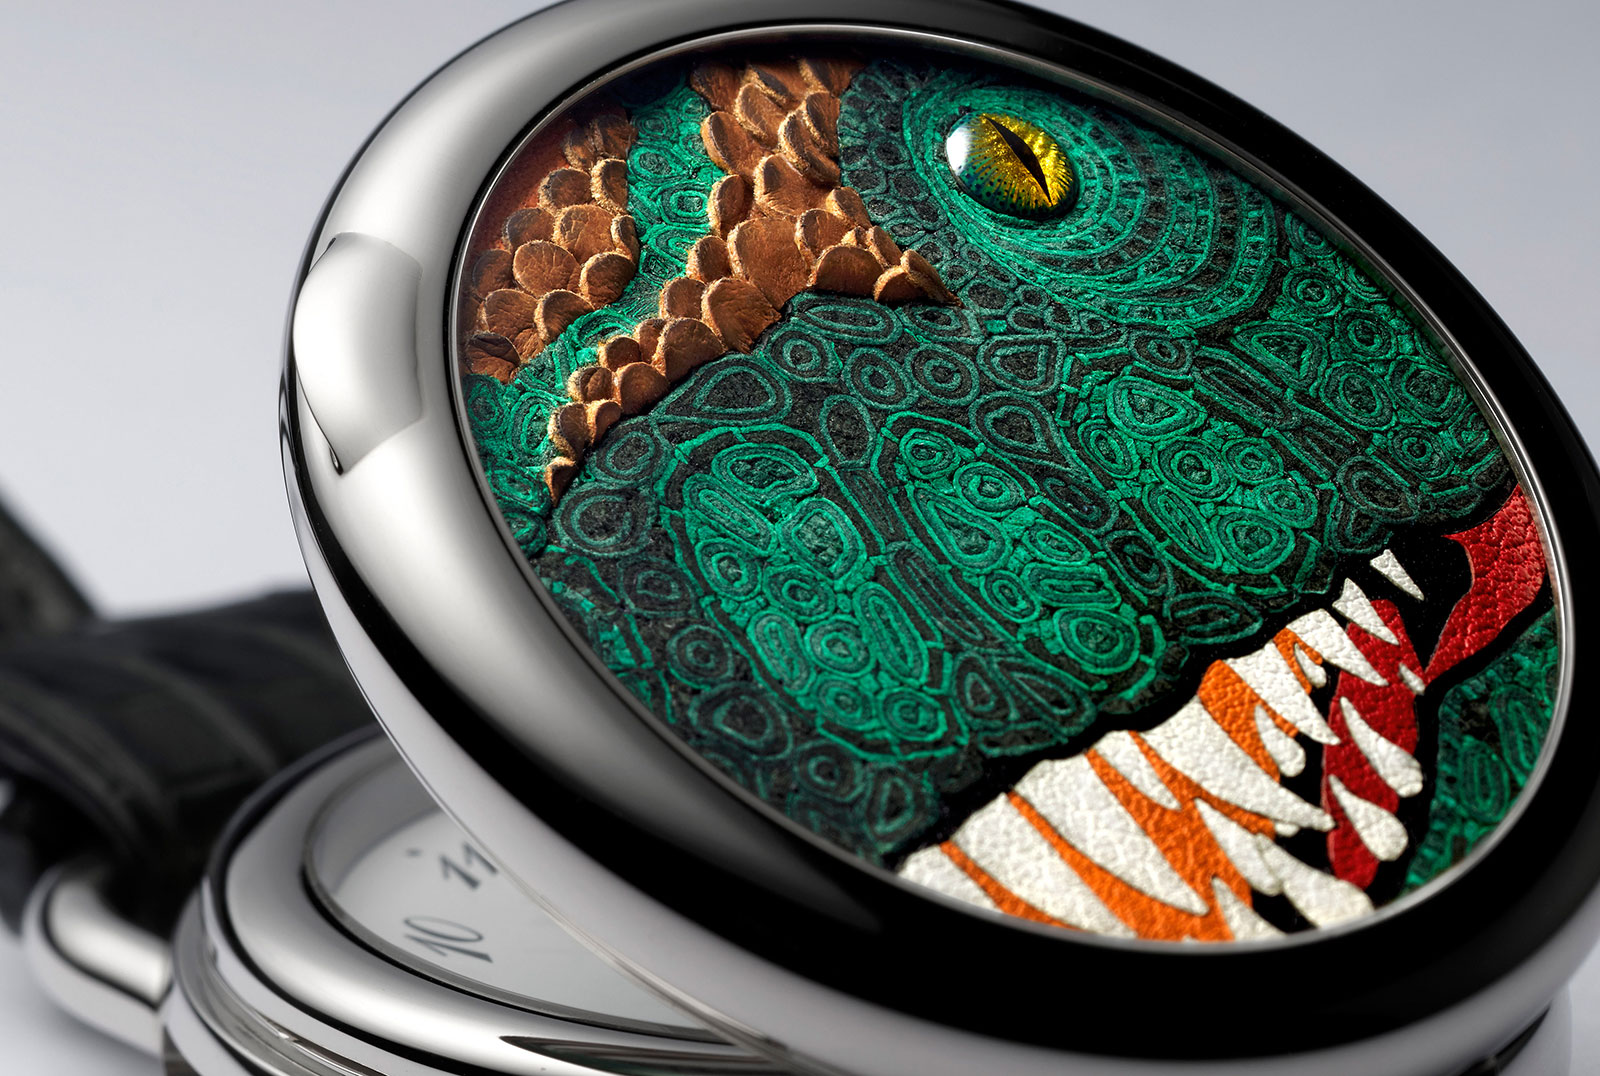 Prepare to be shocked, bamboozled and charmed by the weirdest watches of 2020